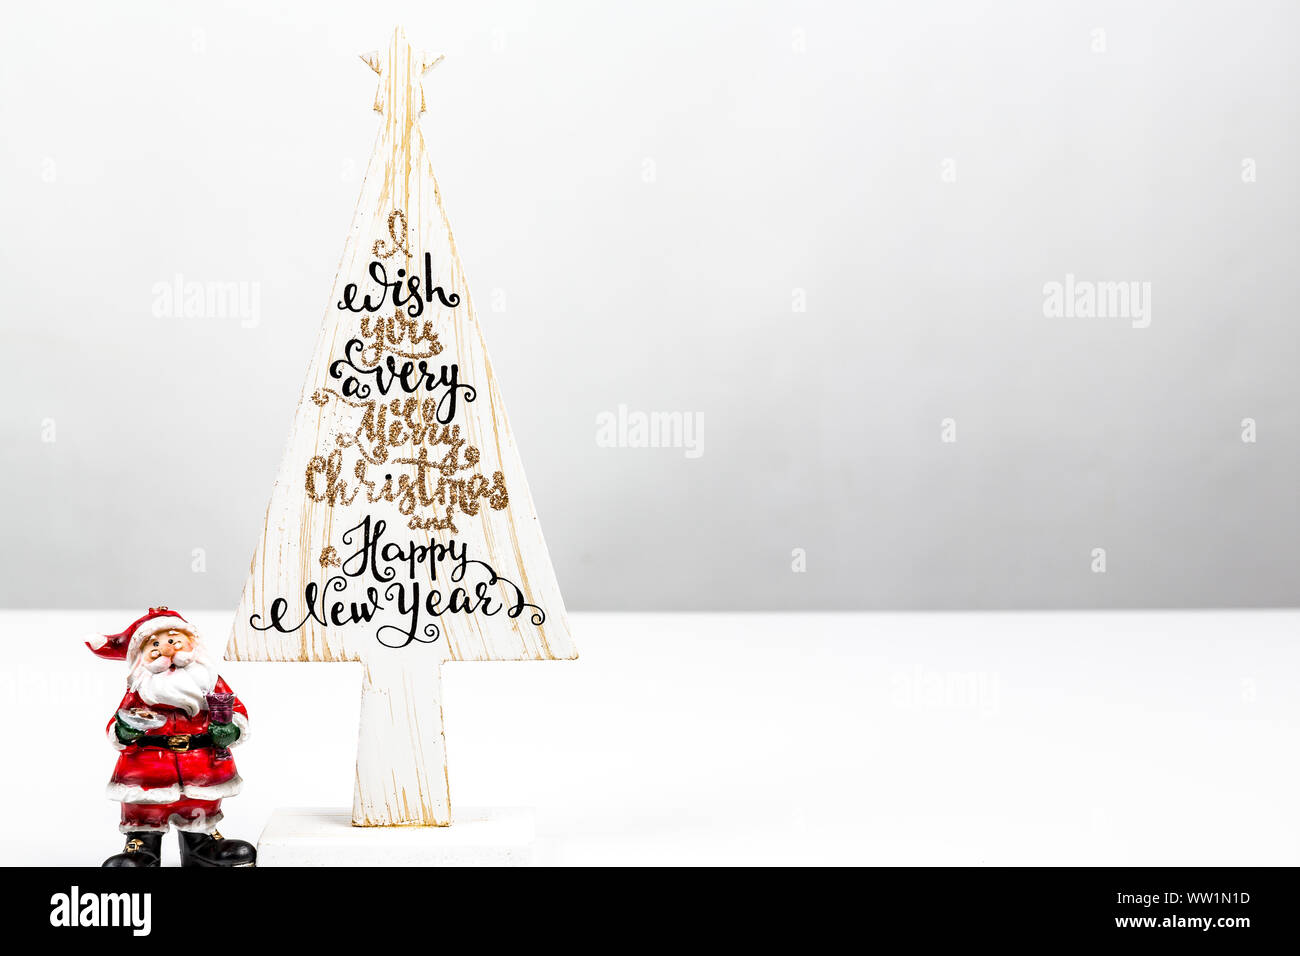 Beautiful Minimal Christmas wood white tree with Merry Christmass and happy new year written, with small Santa Claus, on white backgound Stock Photo